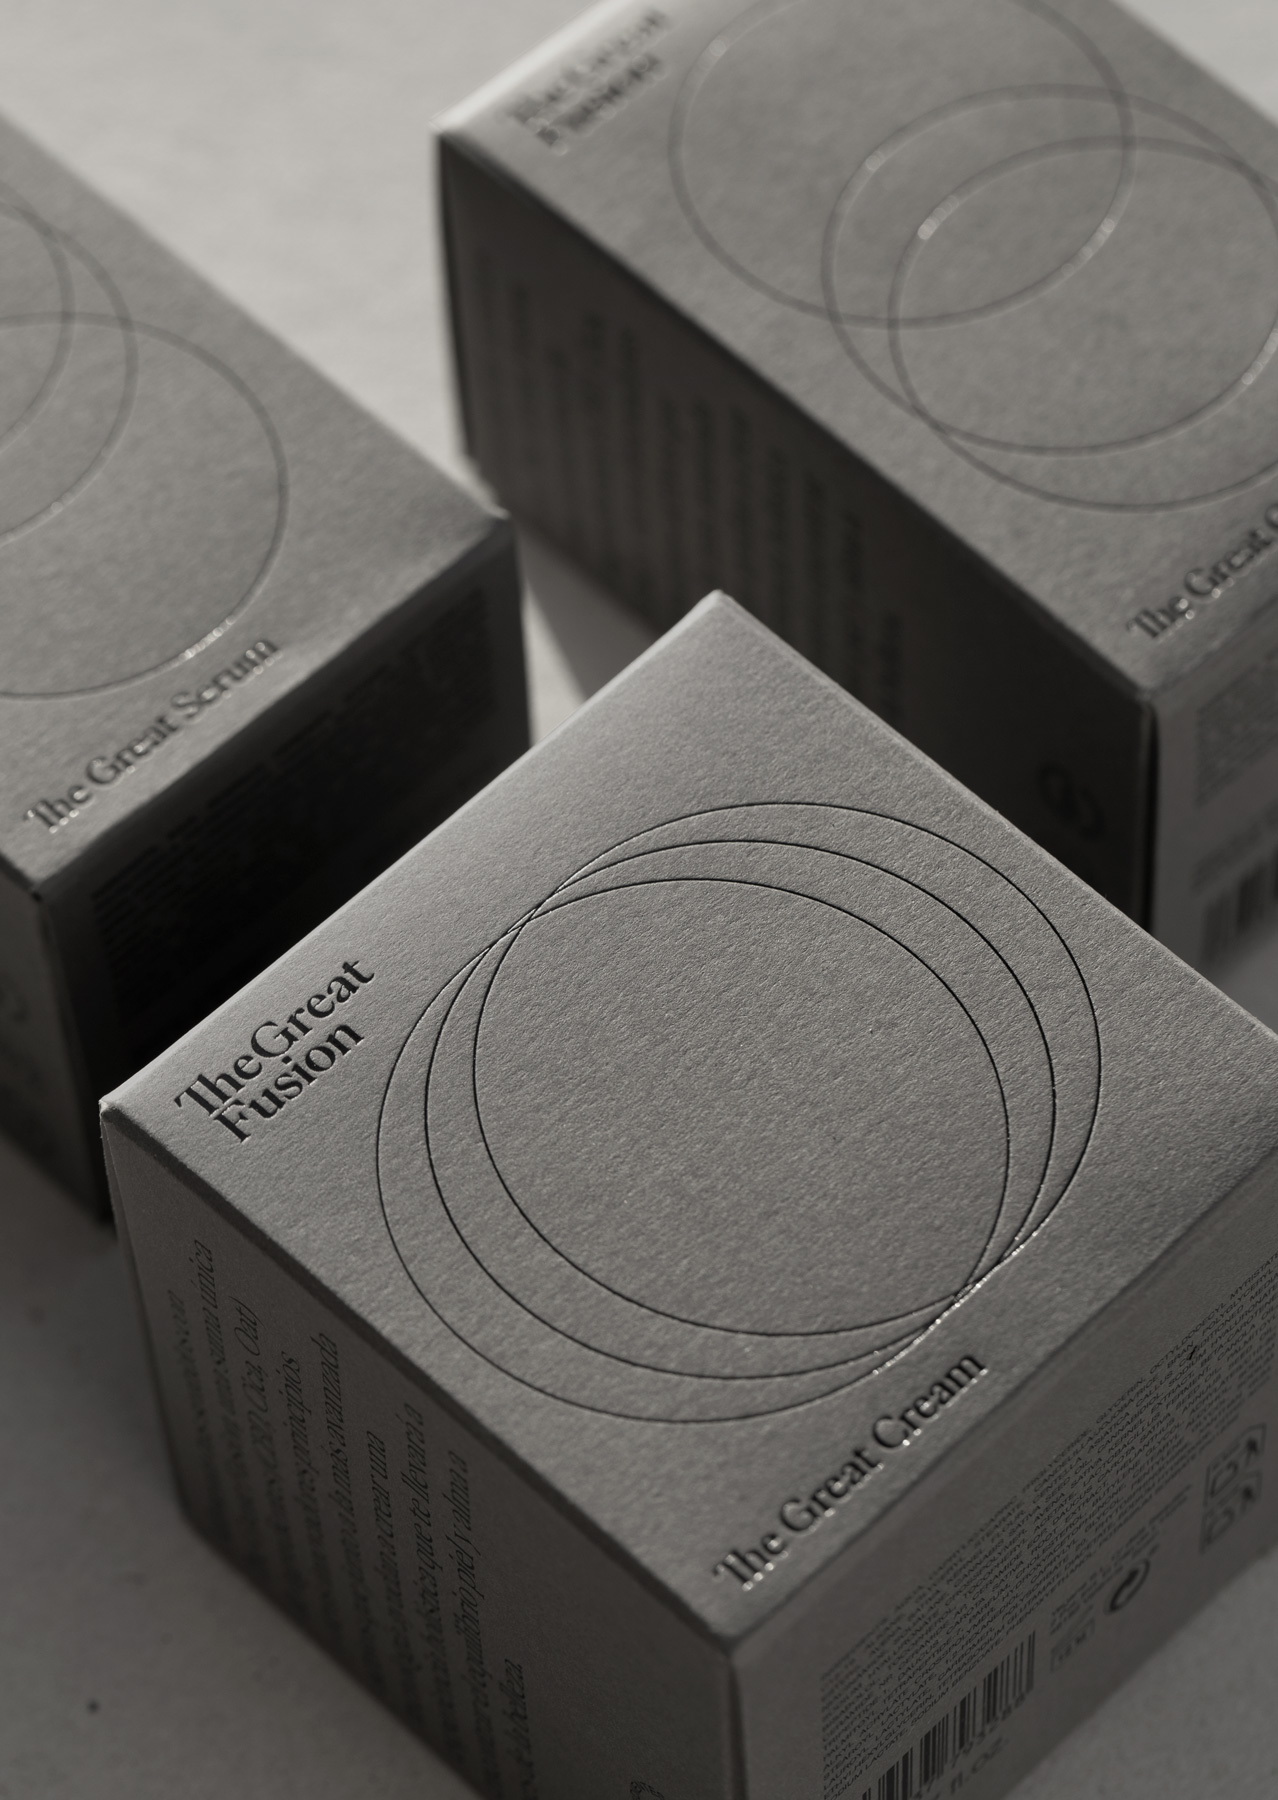 The Great Fusion Packaging Design by Lavernia & Cienfuegos